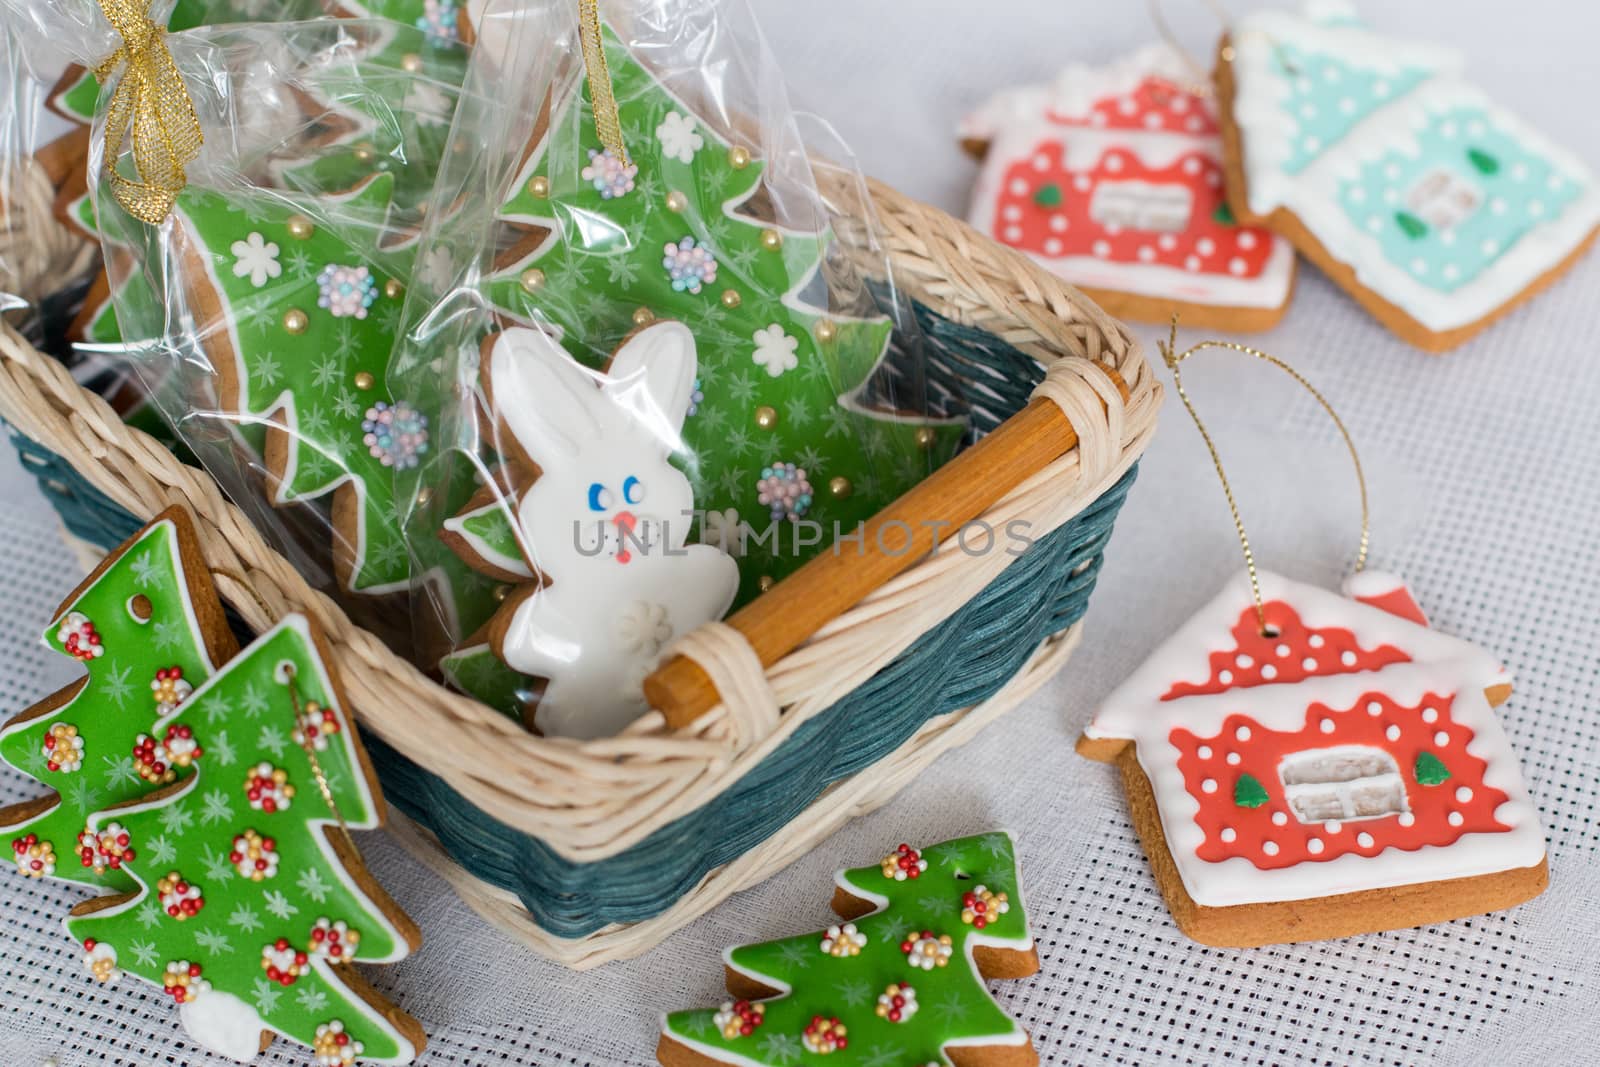 New Year's gingerbread decorated with icing in a basket. Christmas homemade gingerbread cookie in a wicker basket. Christmas and new year card with free text space